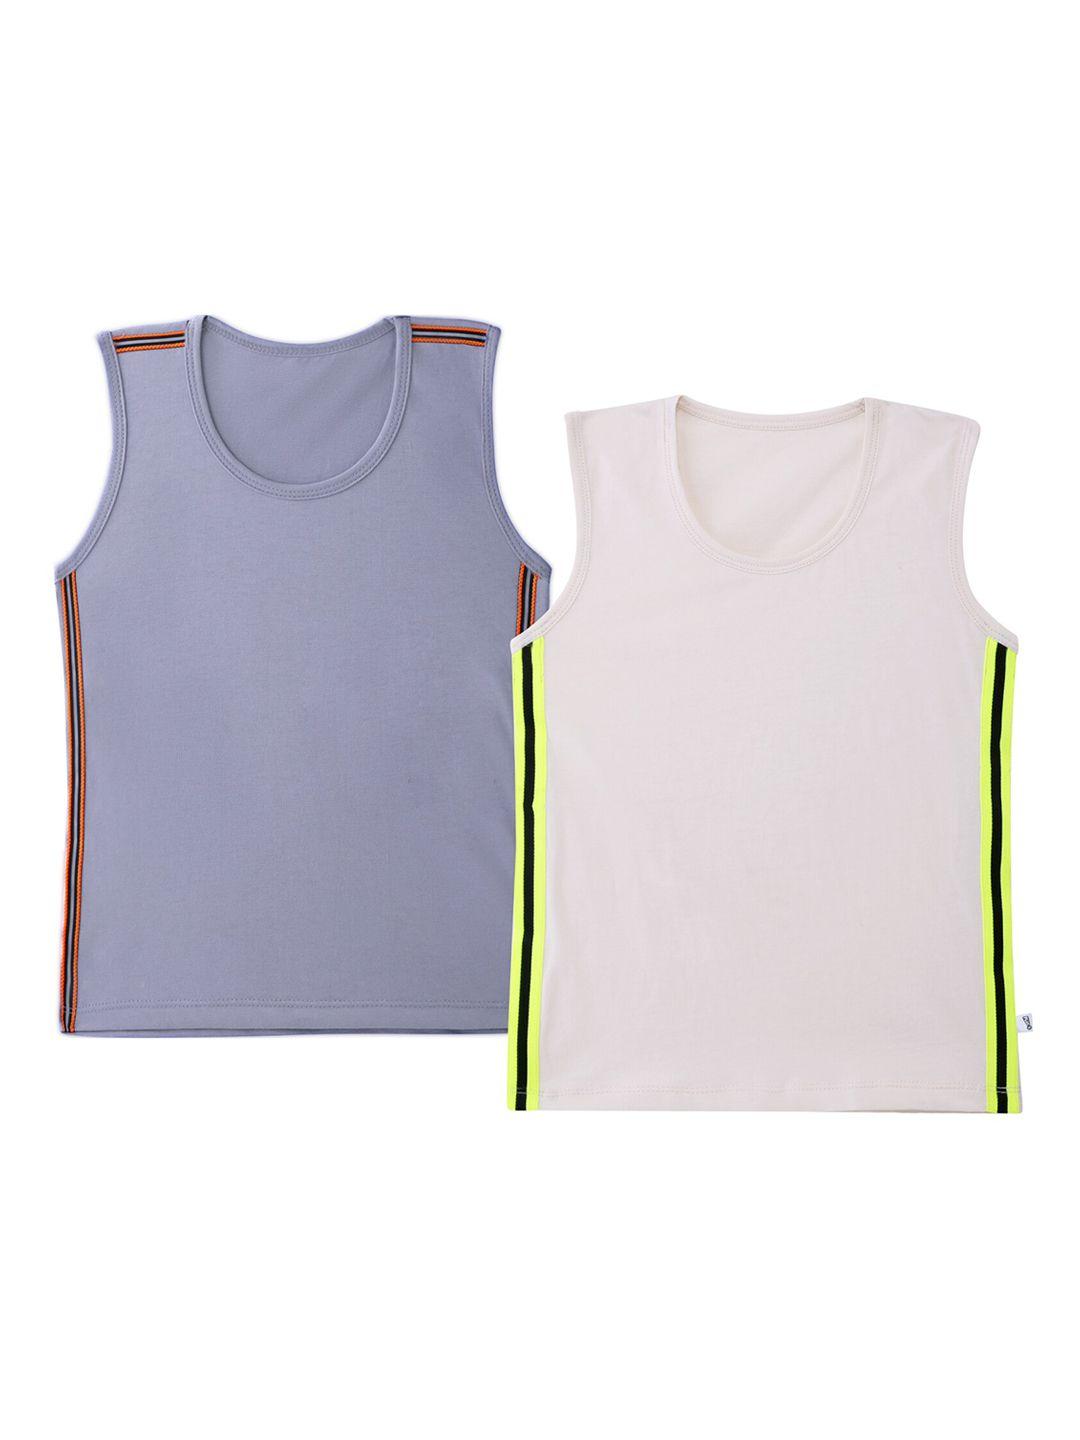 you-got-plan-b-boys-pack-of-2-white-&-grey-solid-pure-cotton-innerwear-vests